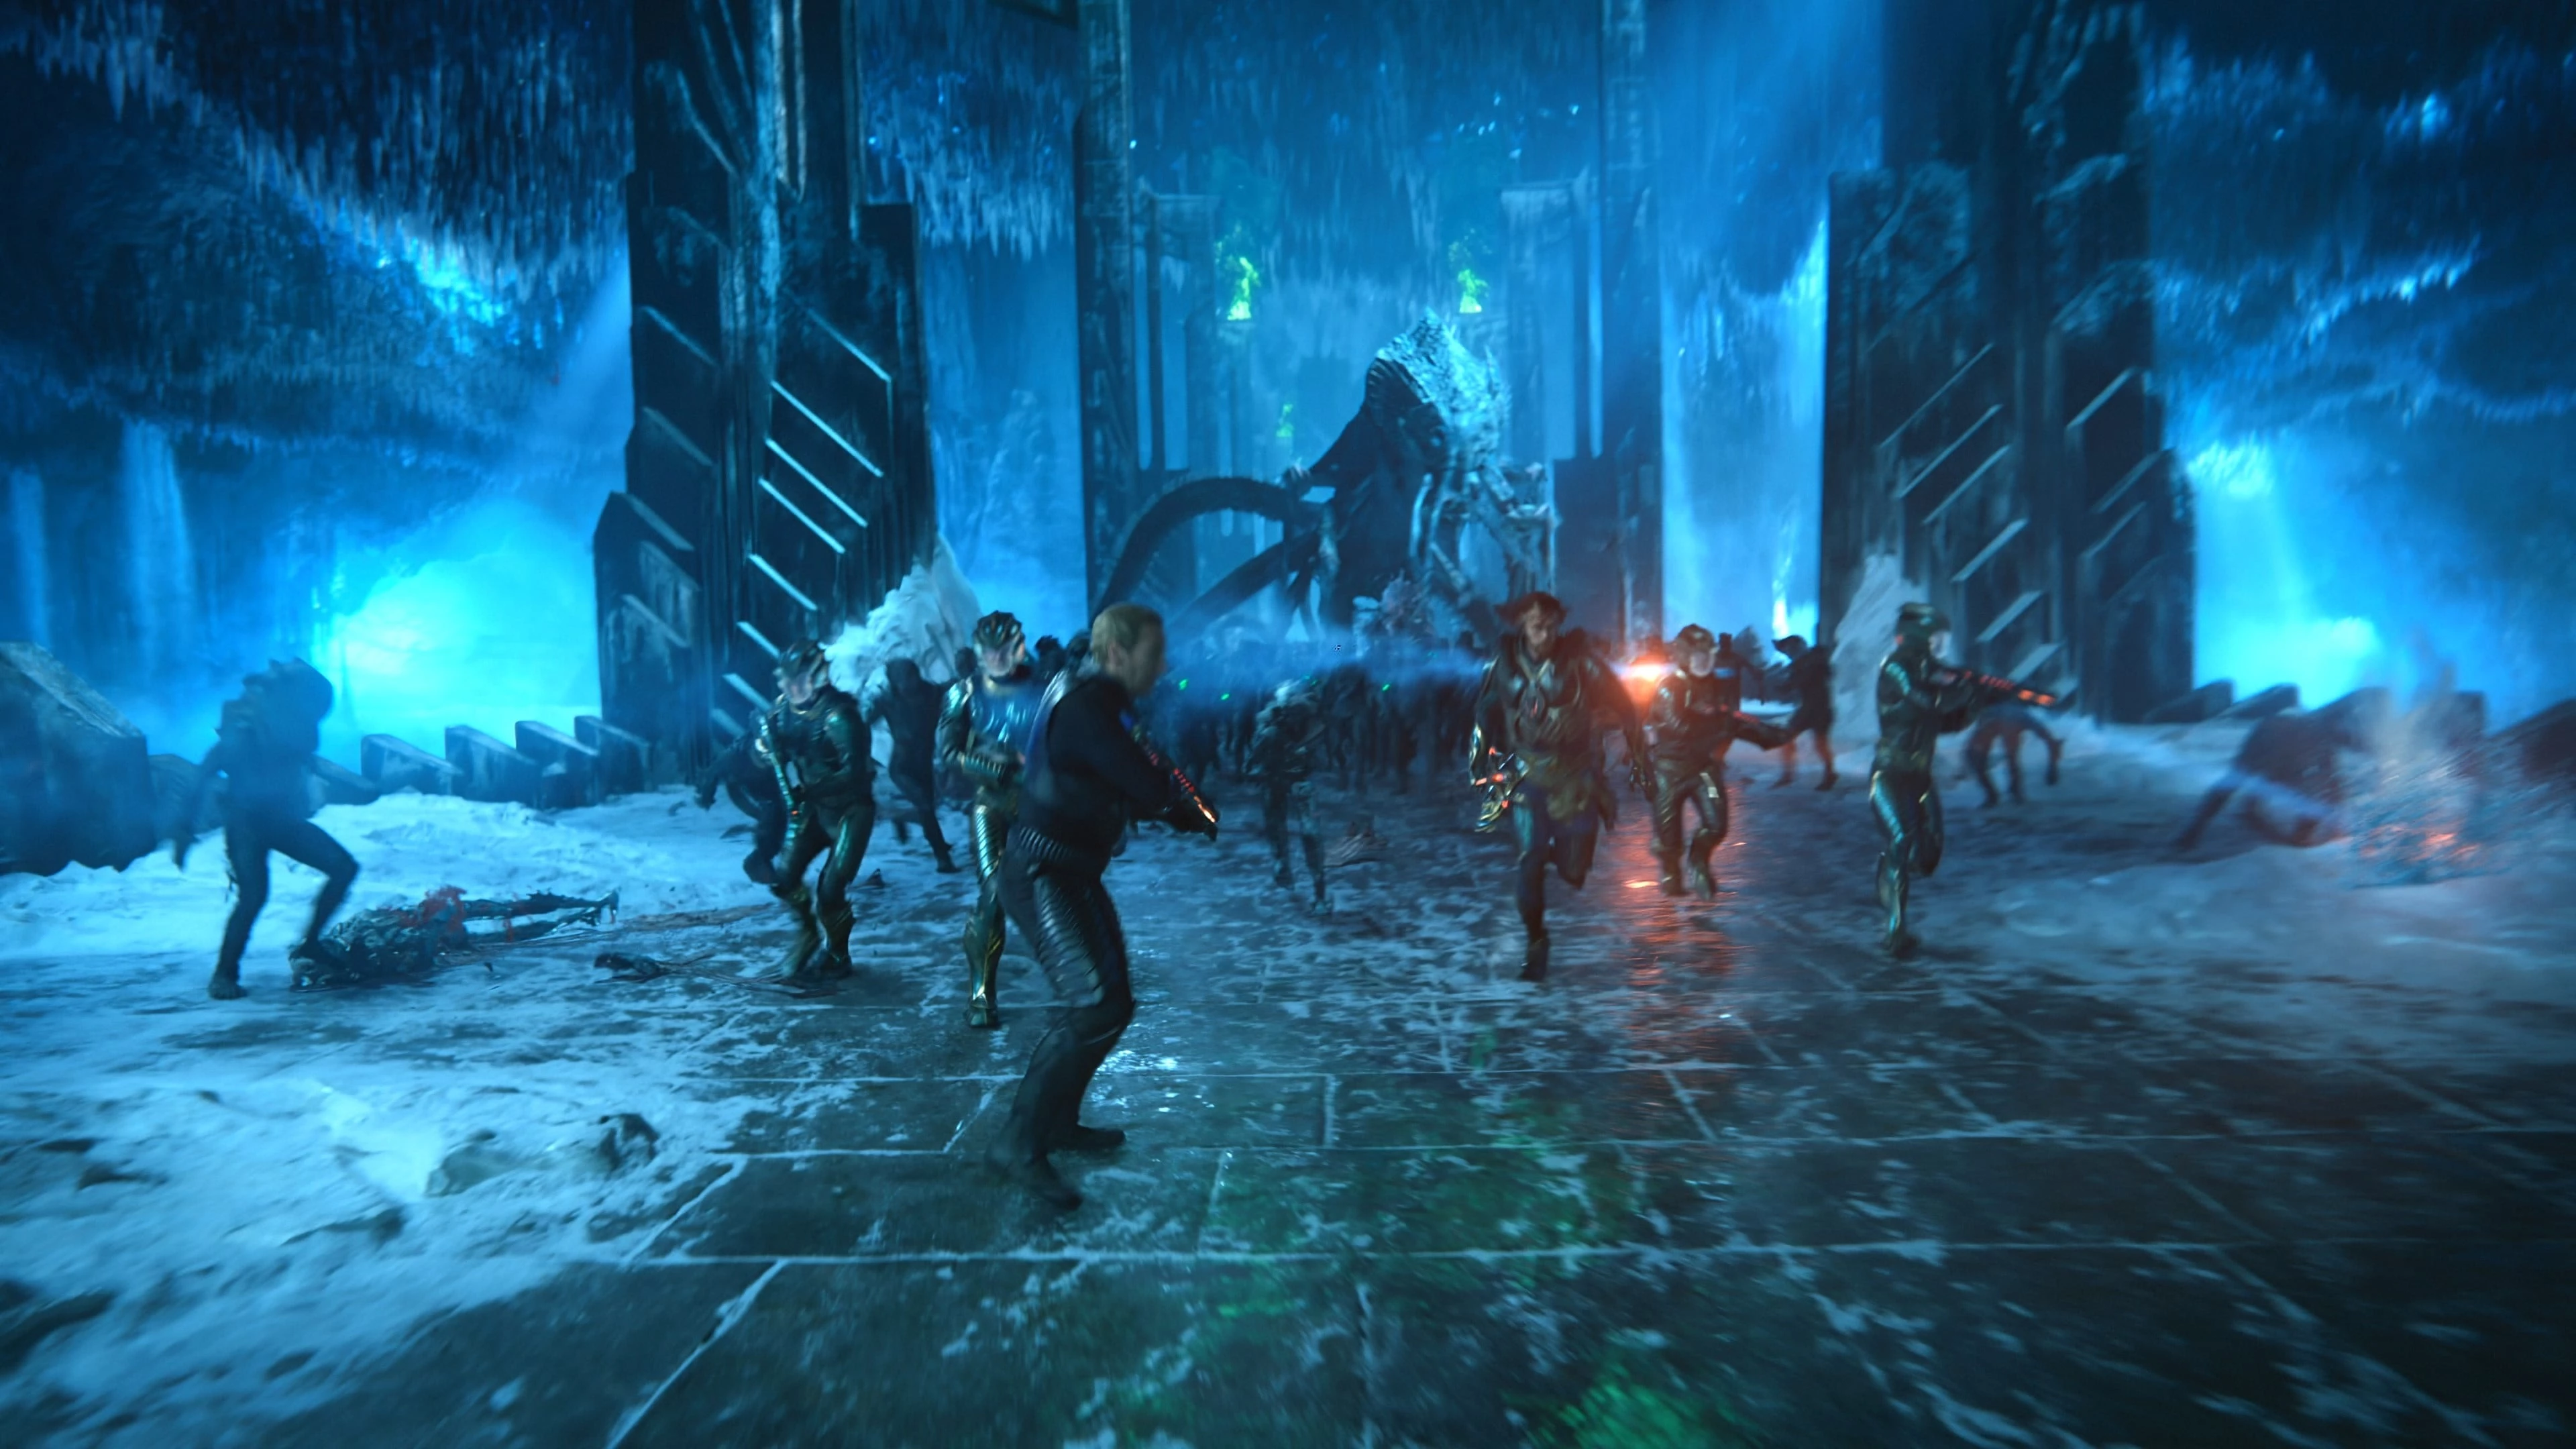 The Citizens Of Atlantis, Fighting Against The Army Of Black Manta